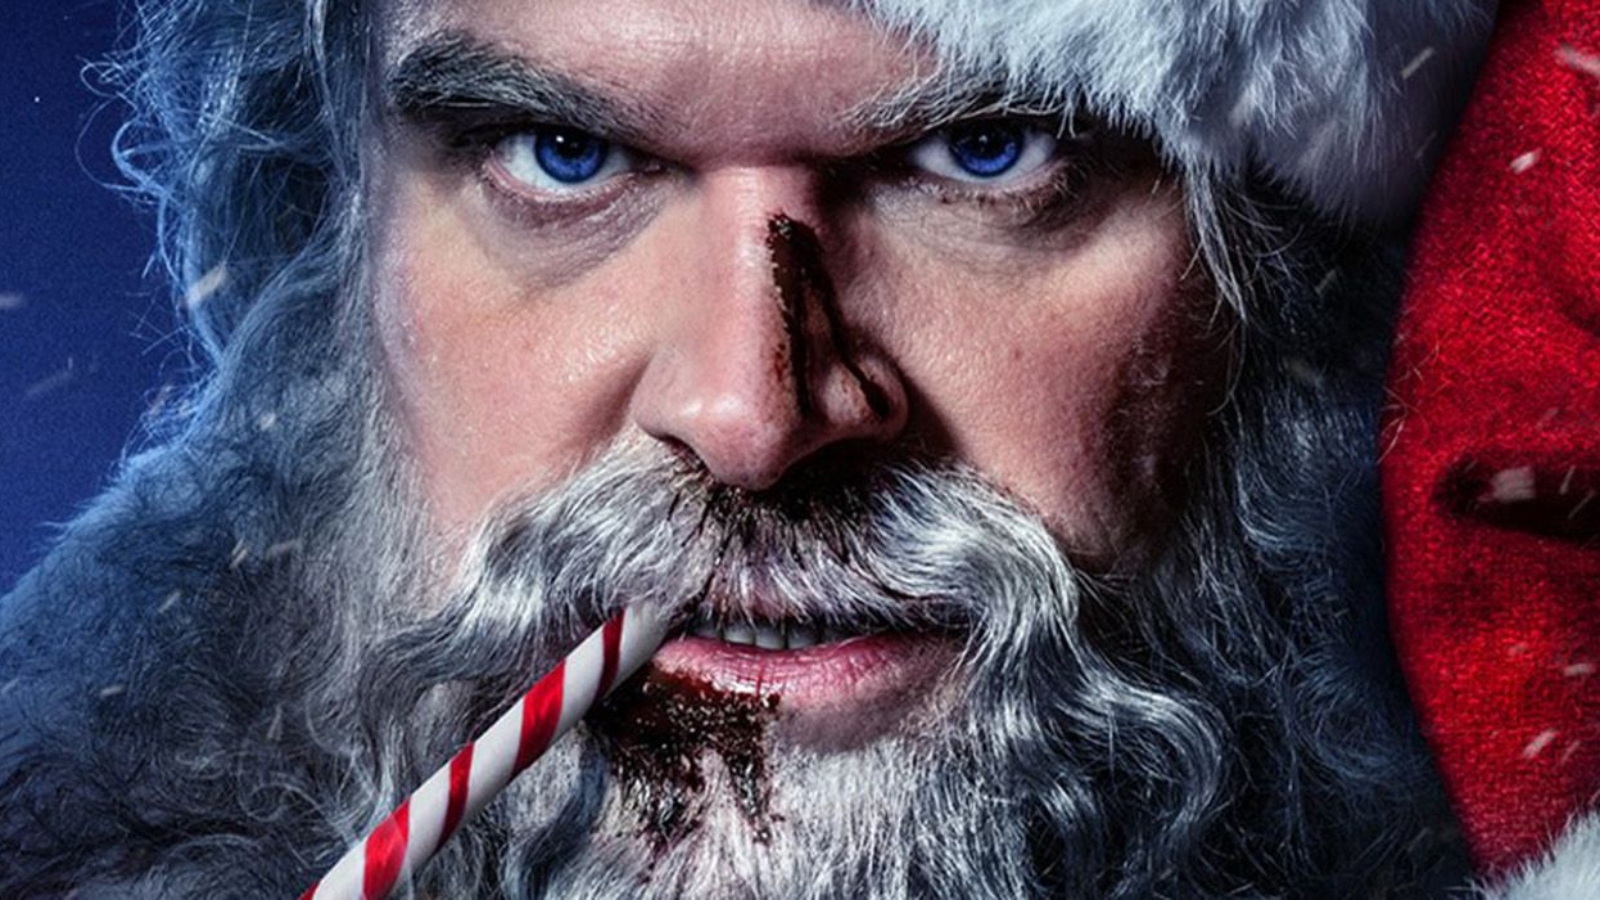 ‘Violent Night’ star David Harbour wasn’t entirely convinced about playing an ass-kicking Santa Claus